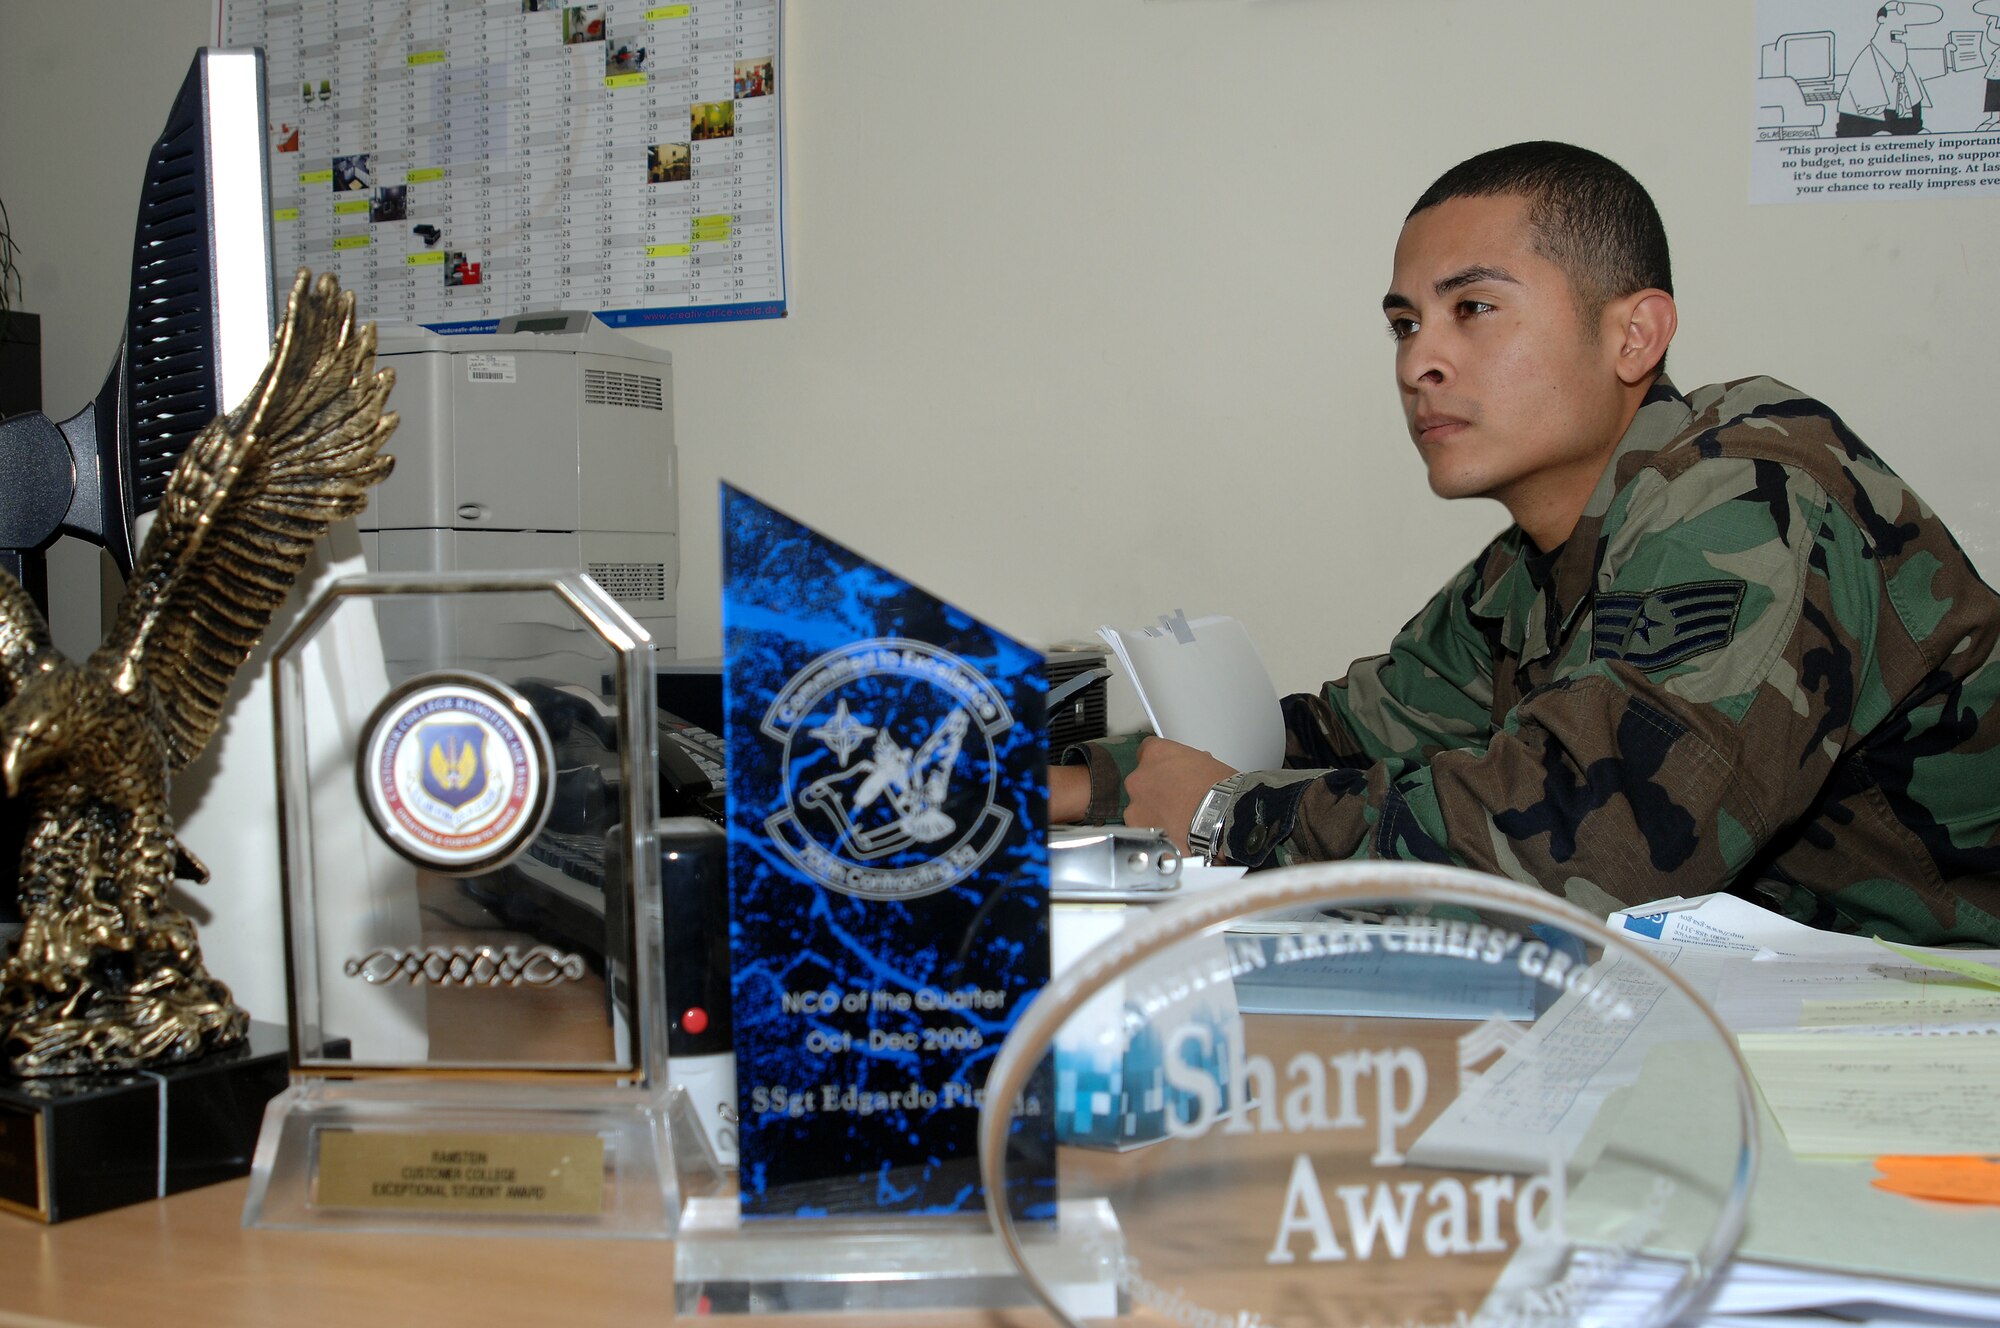 Staff Sgt. Edgardo Pineda, 700th Contracting Squadron, proudly displays his many well-deserved awards while hard at work Jan. 18, at Rhine Ordinance Barracks. Sergeant Pineda is a key contributor to the success of the 700th CONS mission. (U.S. Air Force Photo/A1C Kenny Holston)
